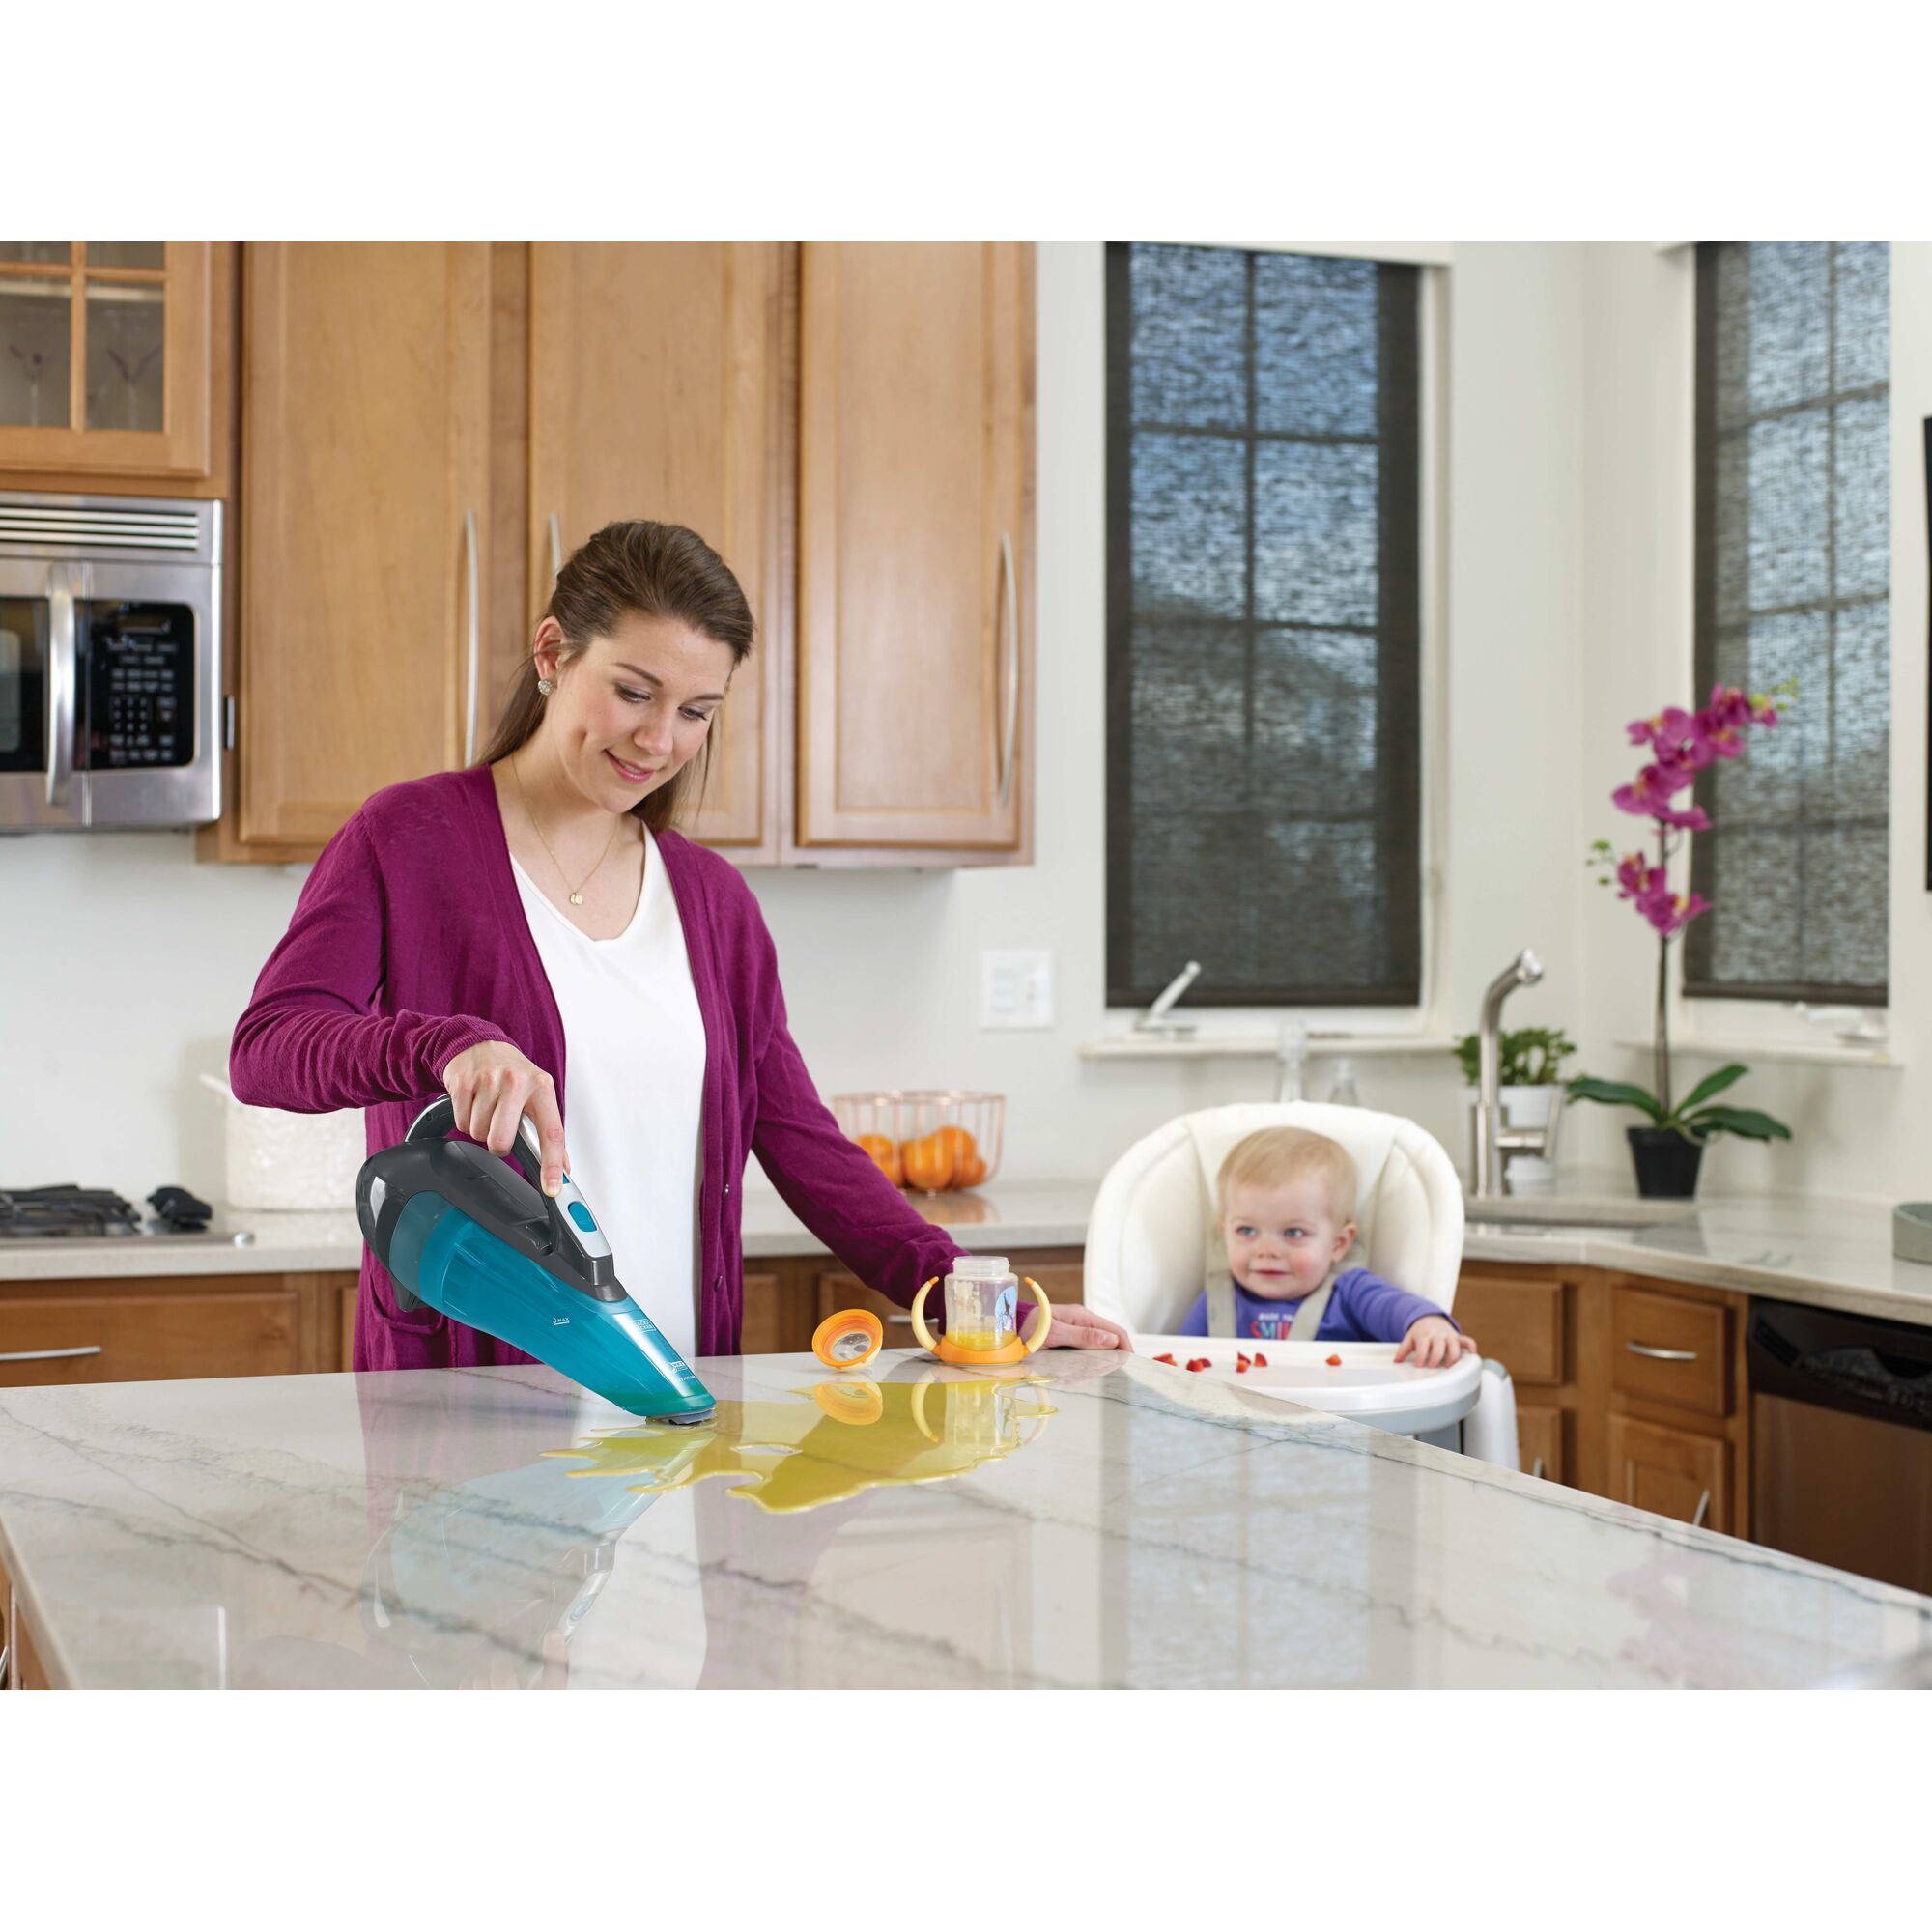 Dustbuster Advanced Clean Wet or Dry Cordless Hand Vacuum being used by person to clean spilled baby juice from kitchen countertop.